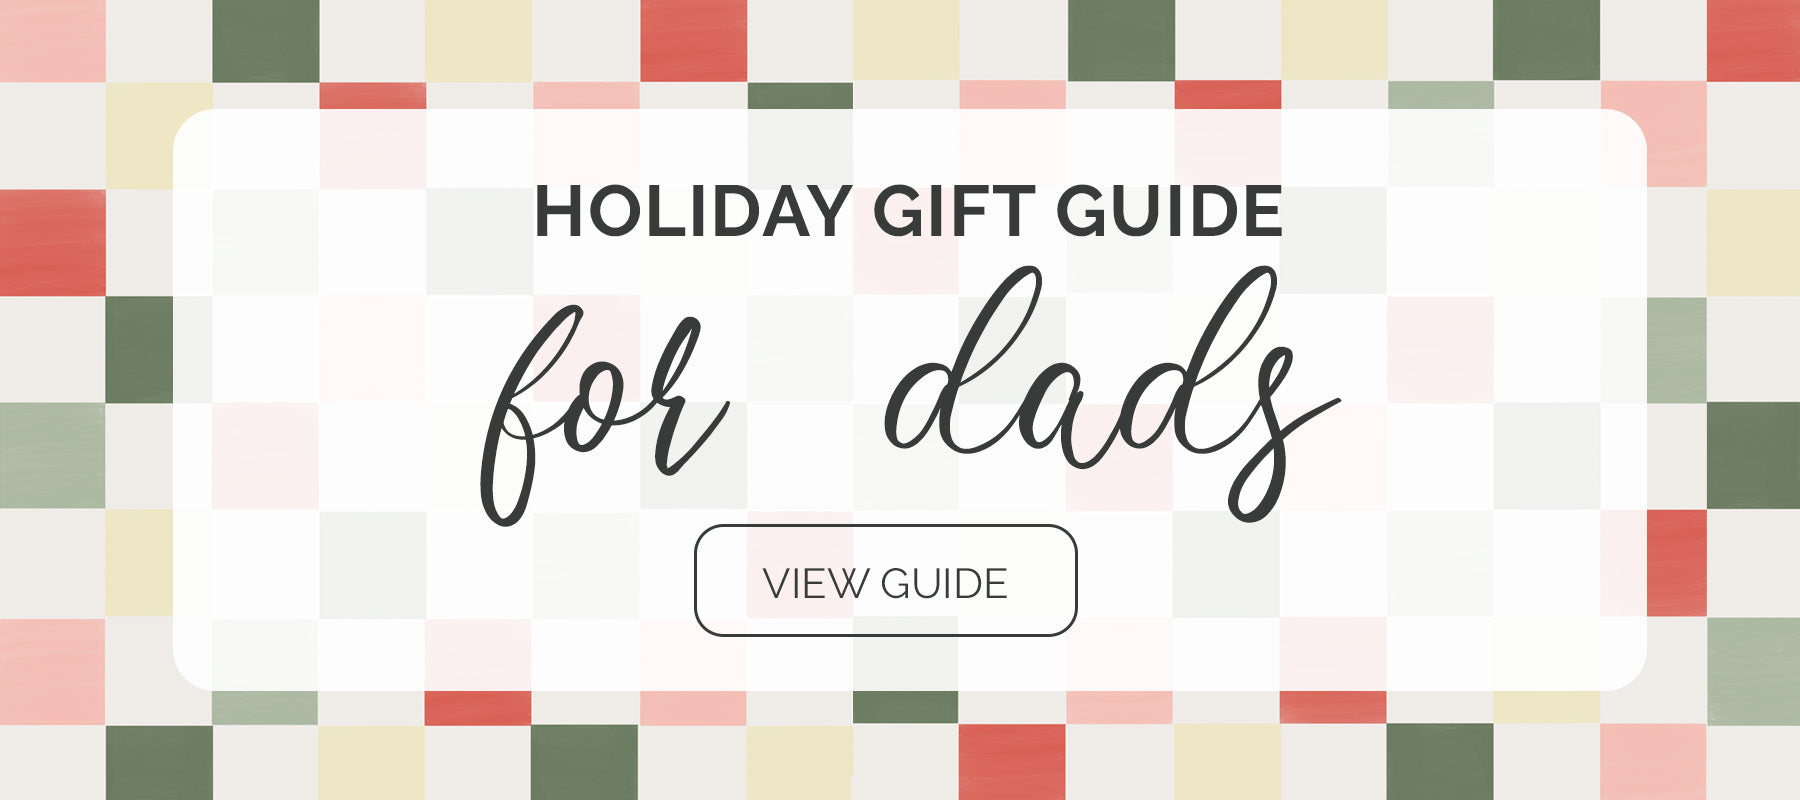 Parker Baby Co. Holiday Gift Guides for Dads